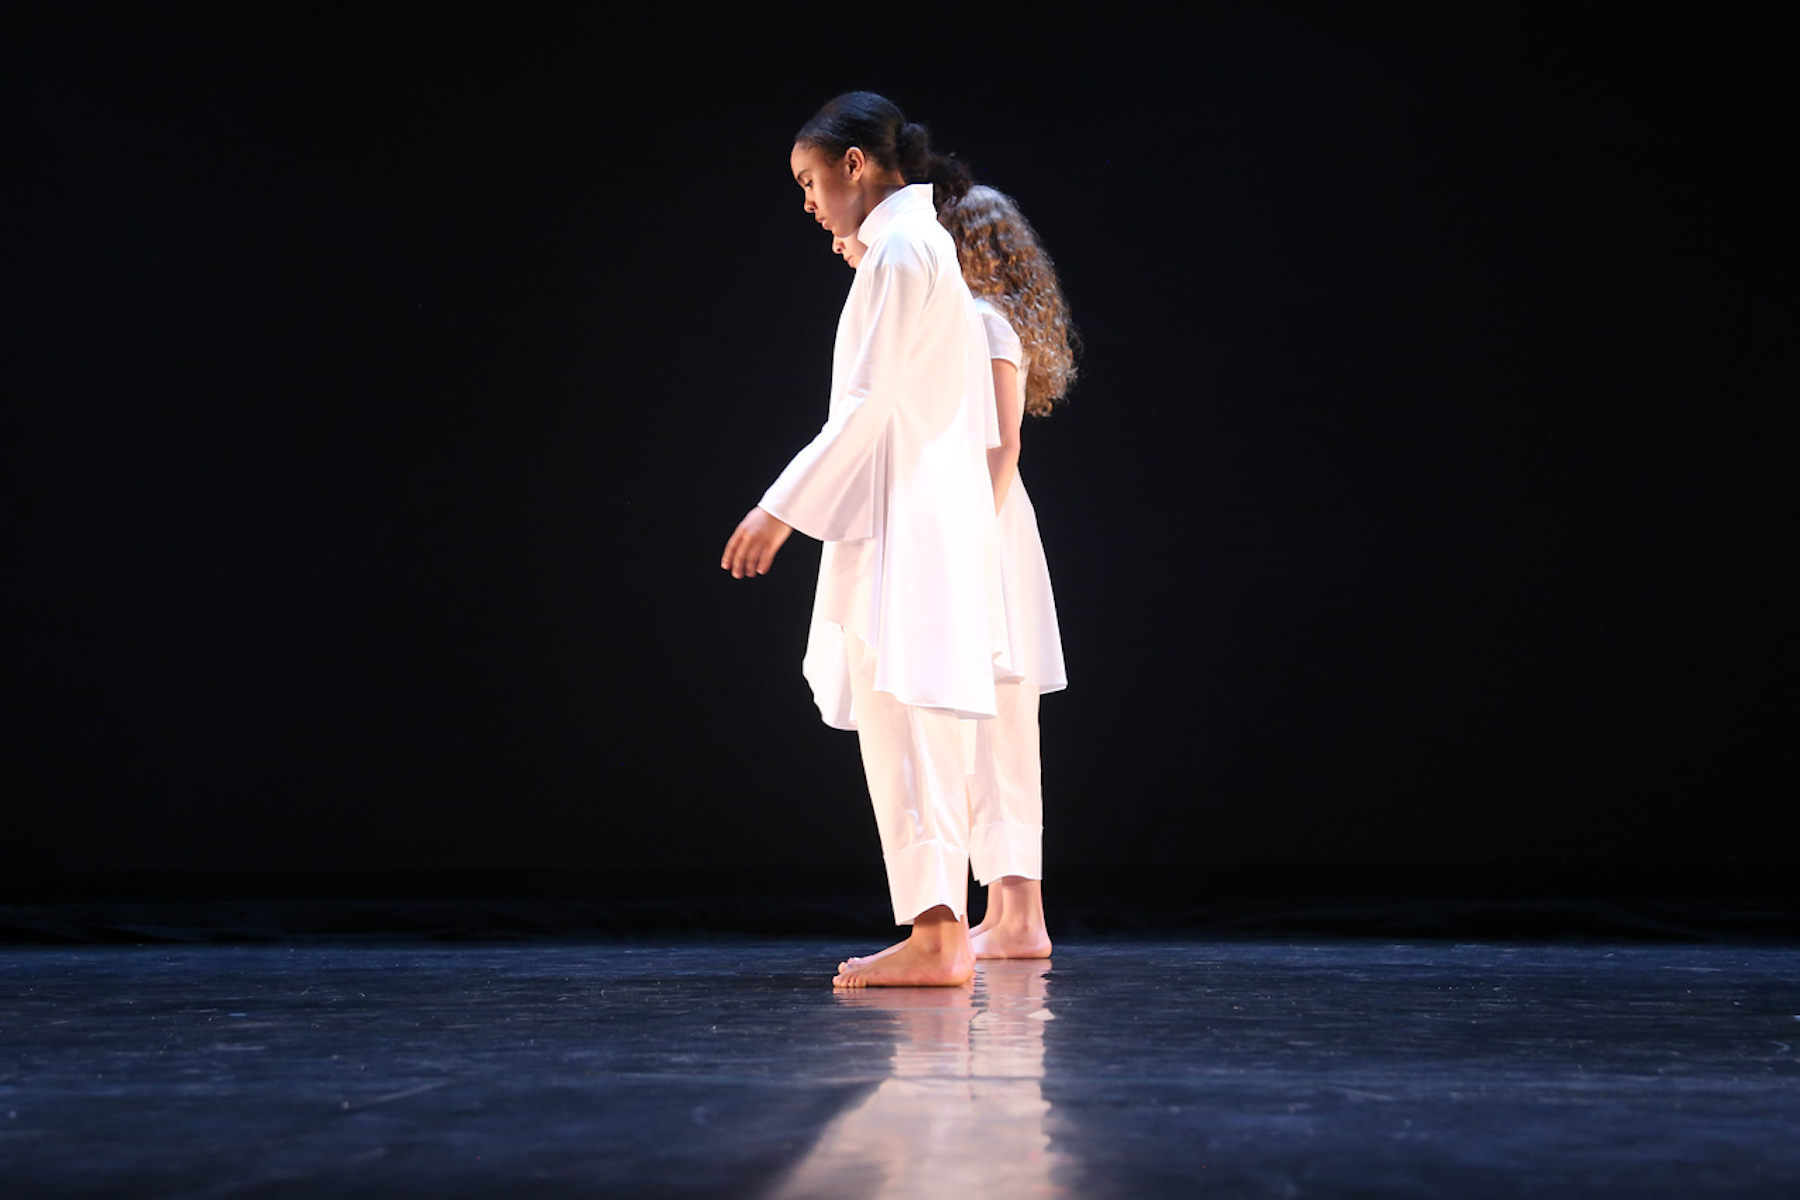 Fieldston Upper dancers prepare to perform on stage, wearing all white.